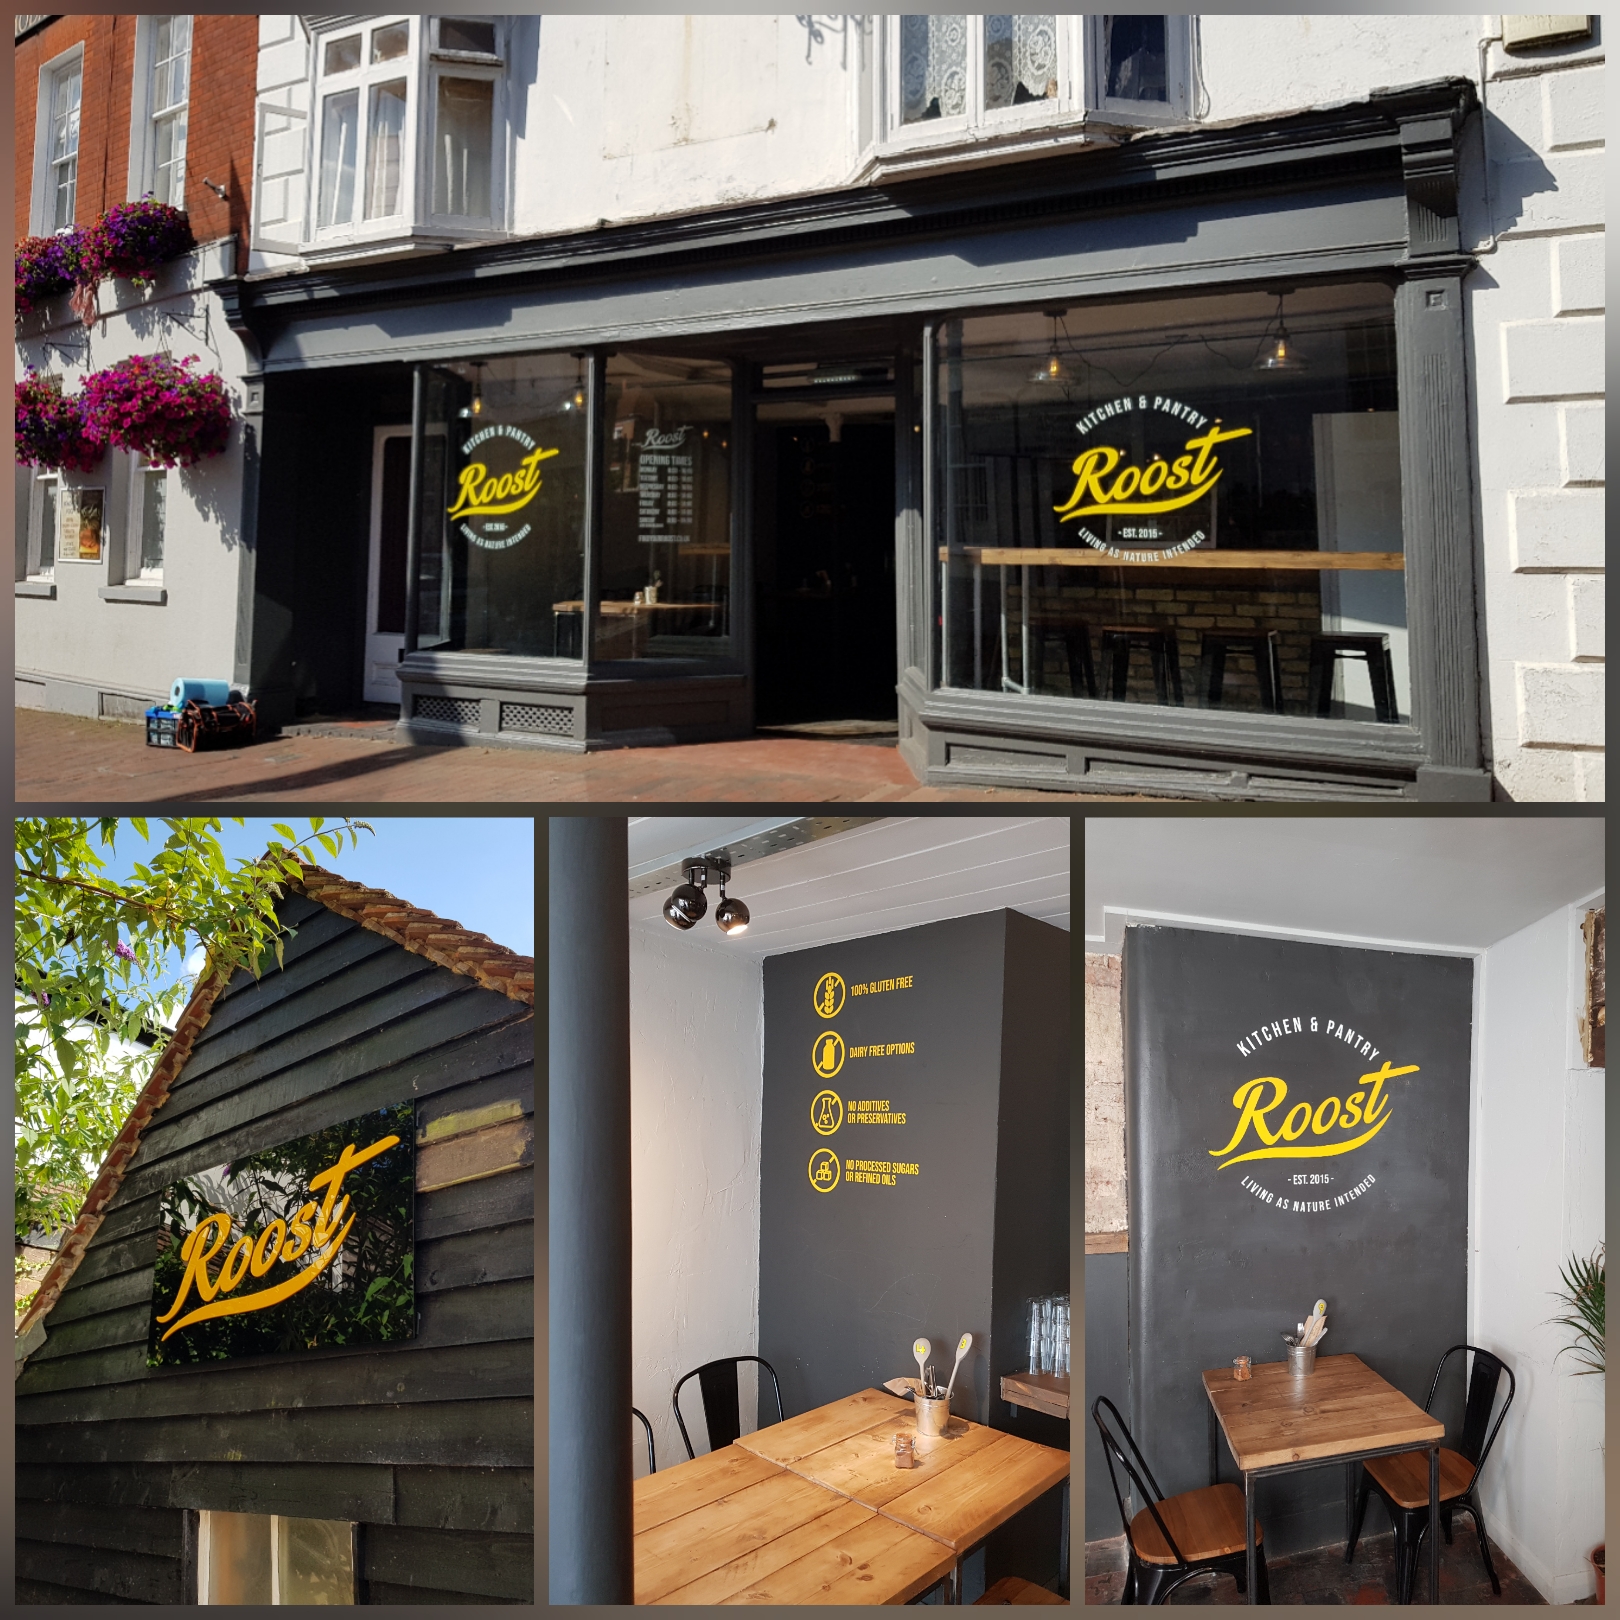 Roost restaurant in Surrey vinyl graphics for windows and walls by Bluedot Display